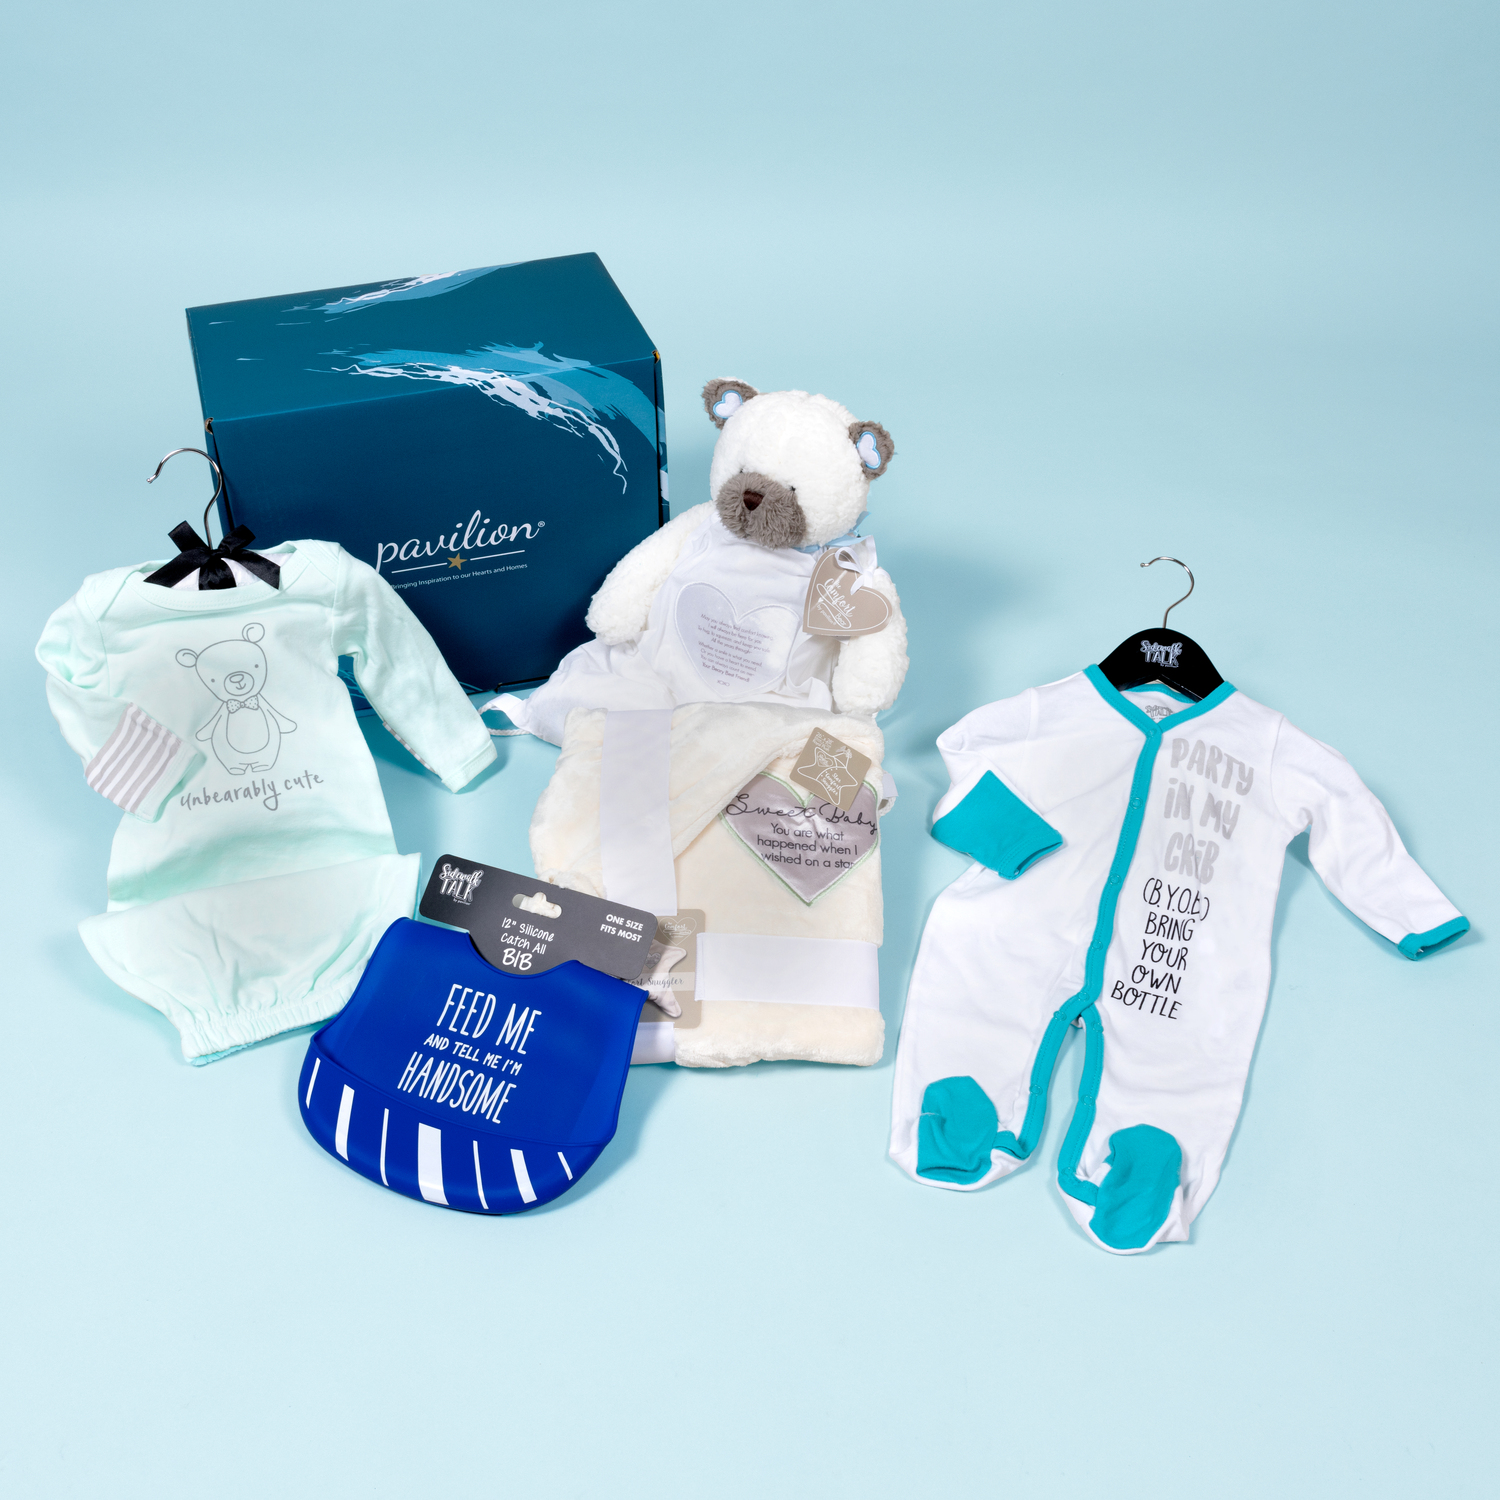 Baby Boy Gift Box by Packaged With Positivity - Baby Boy Gift Box - $120.00 Value